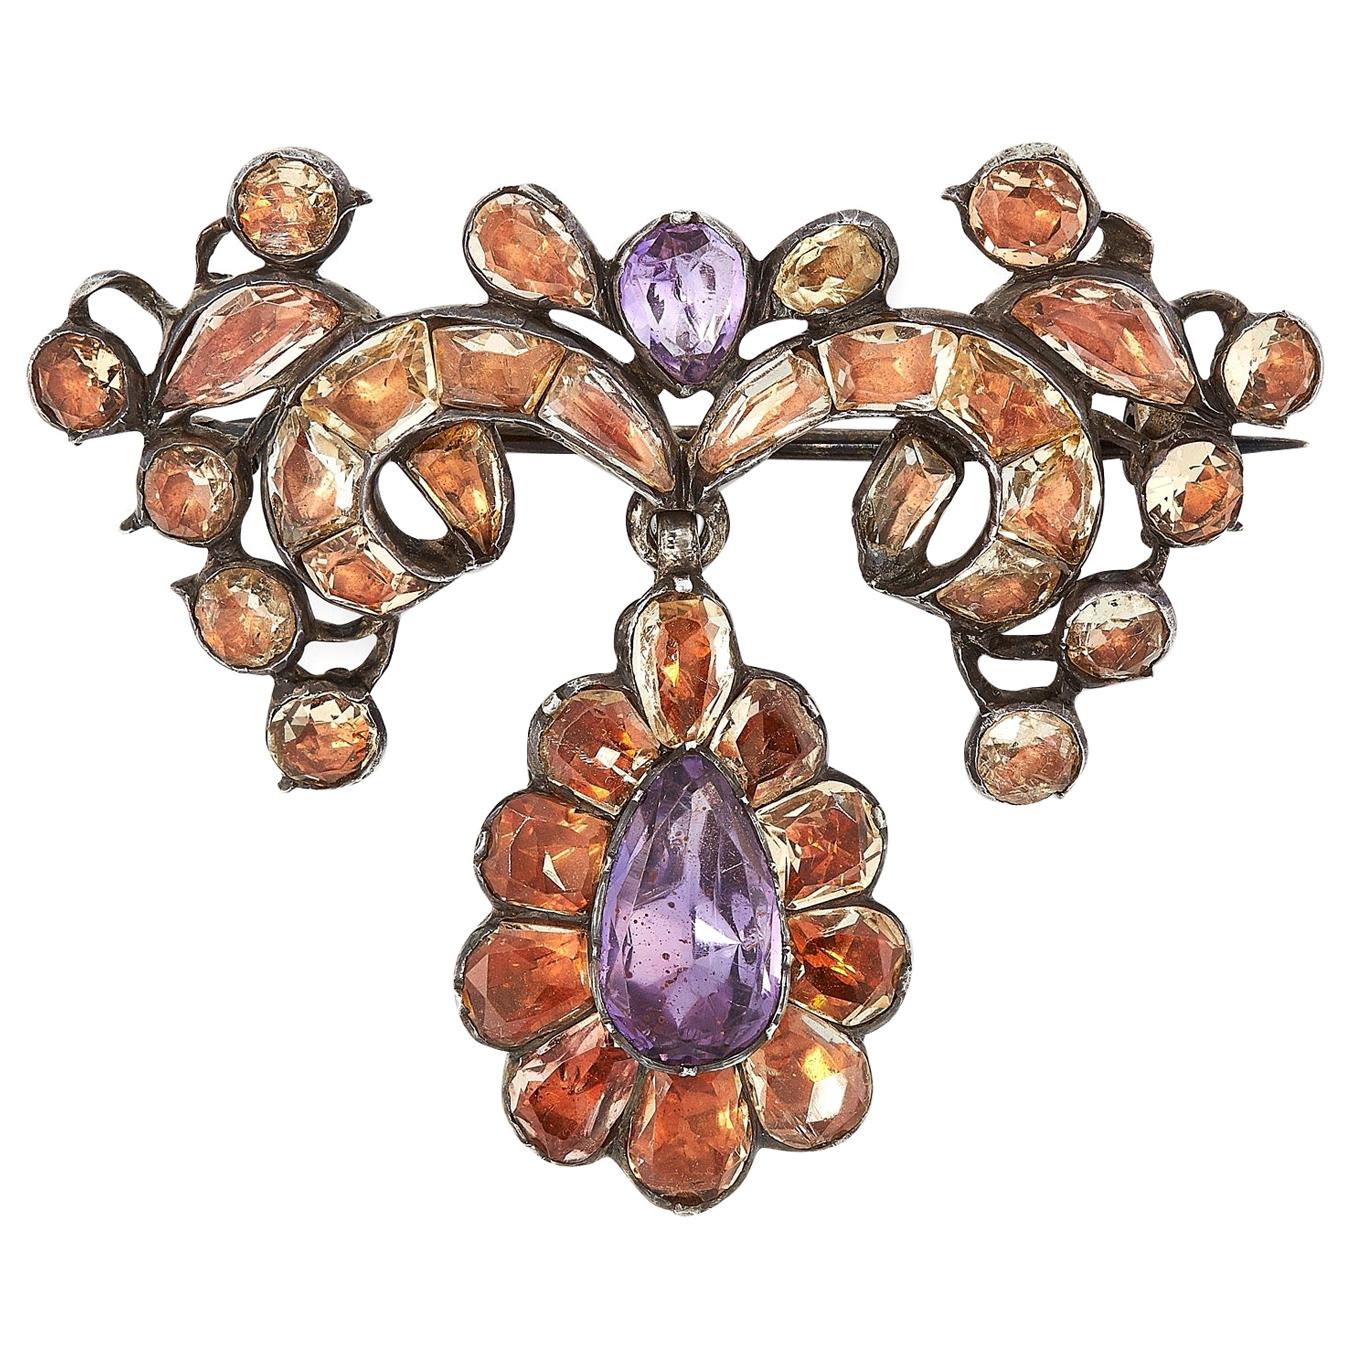 Antique 18th Century Imperial Topaz Amethyst Brooch Silver Portuguese, 1770s